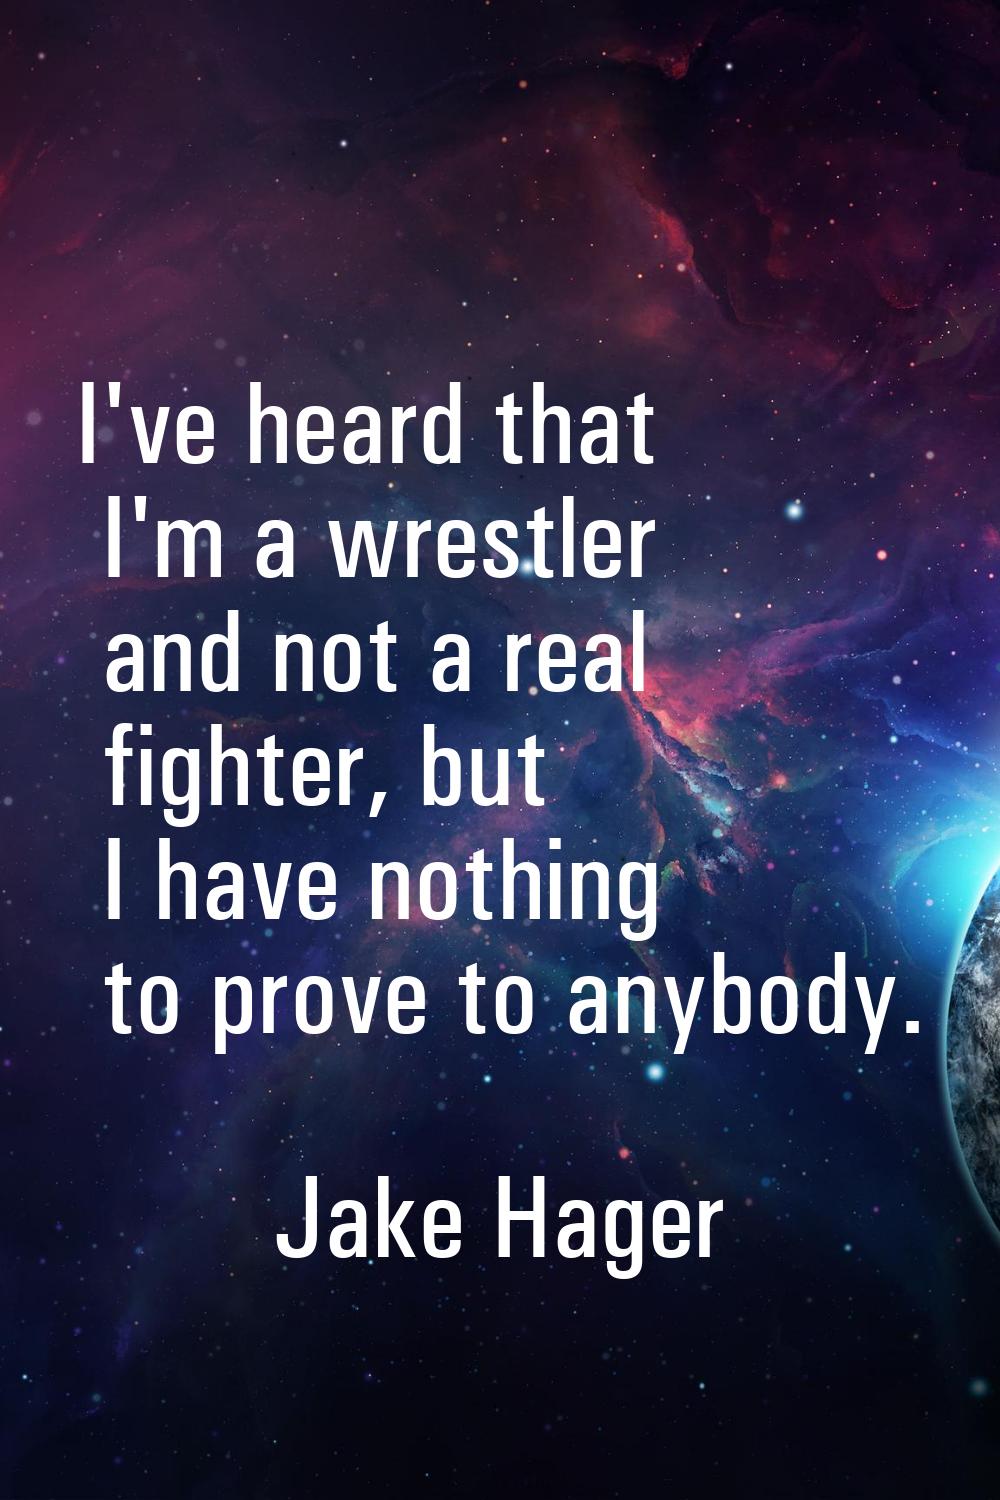 I've heard that I'm a wrestler and not a real fighter, but I have nothing to prove to anybody.